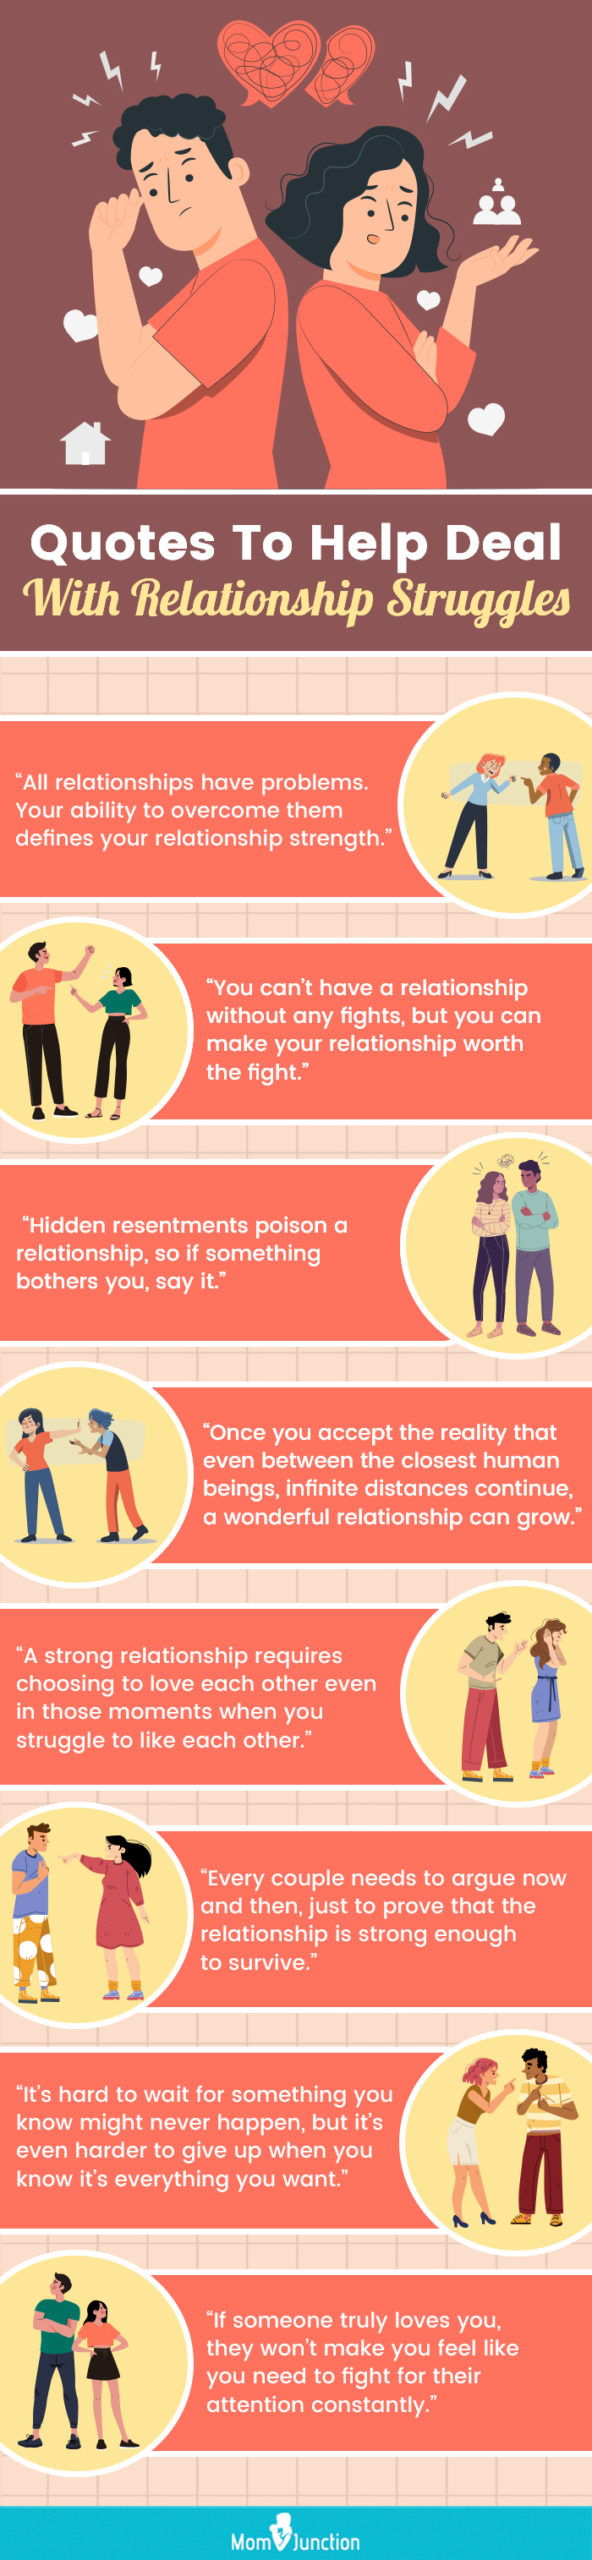 How Fighting in Love Can Improve Your Relationship